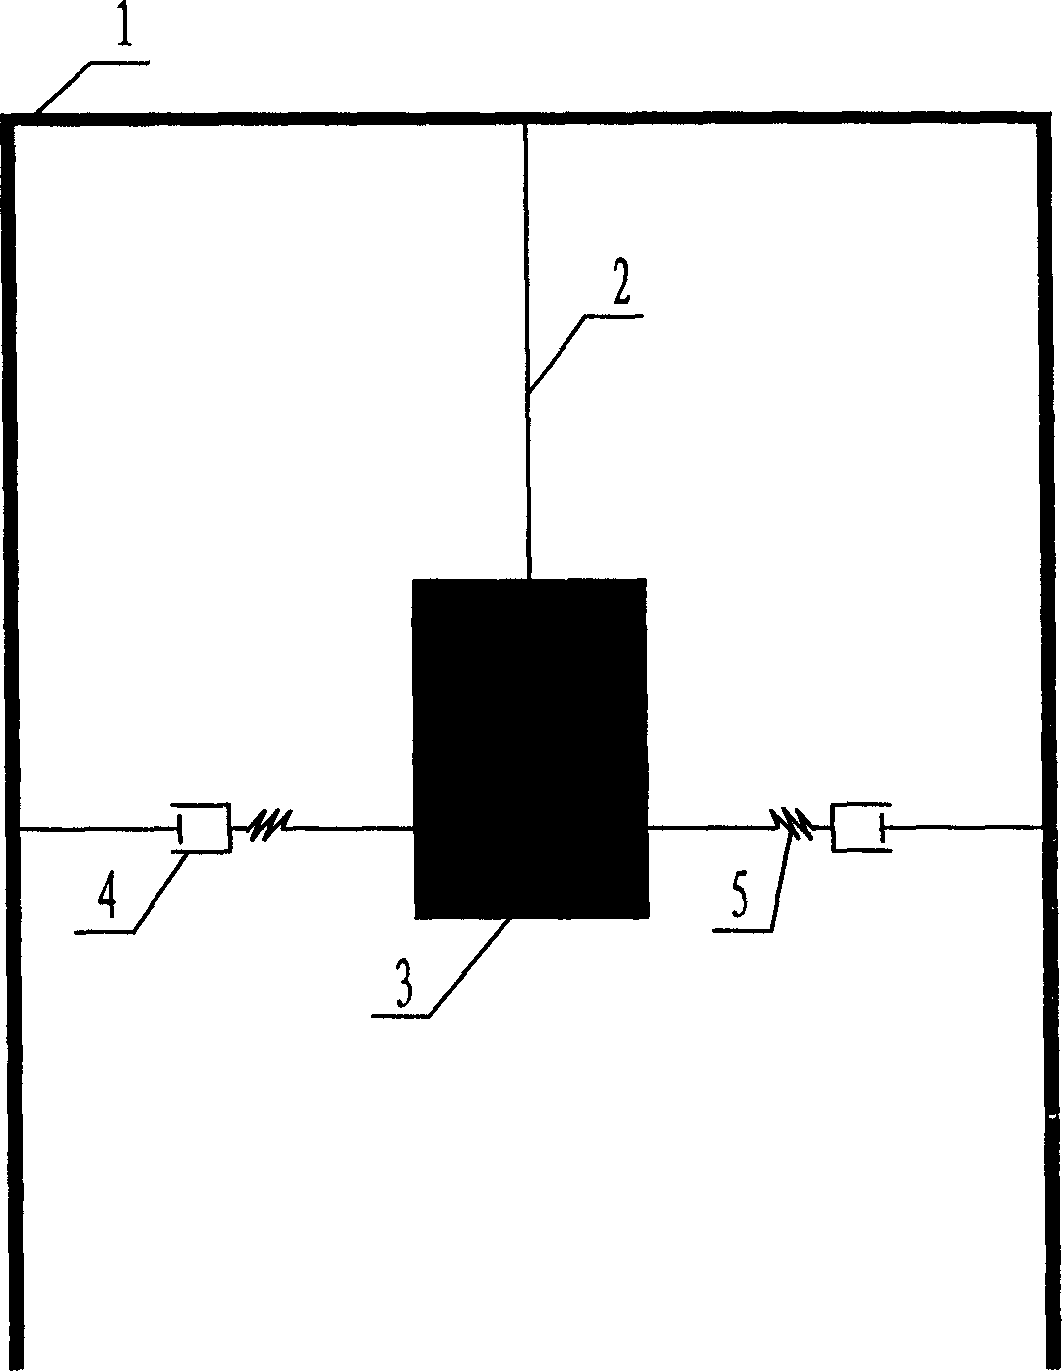 Damping controller for suspended tuning mass damper